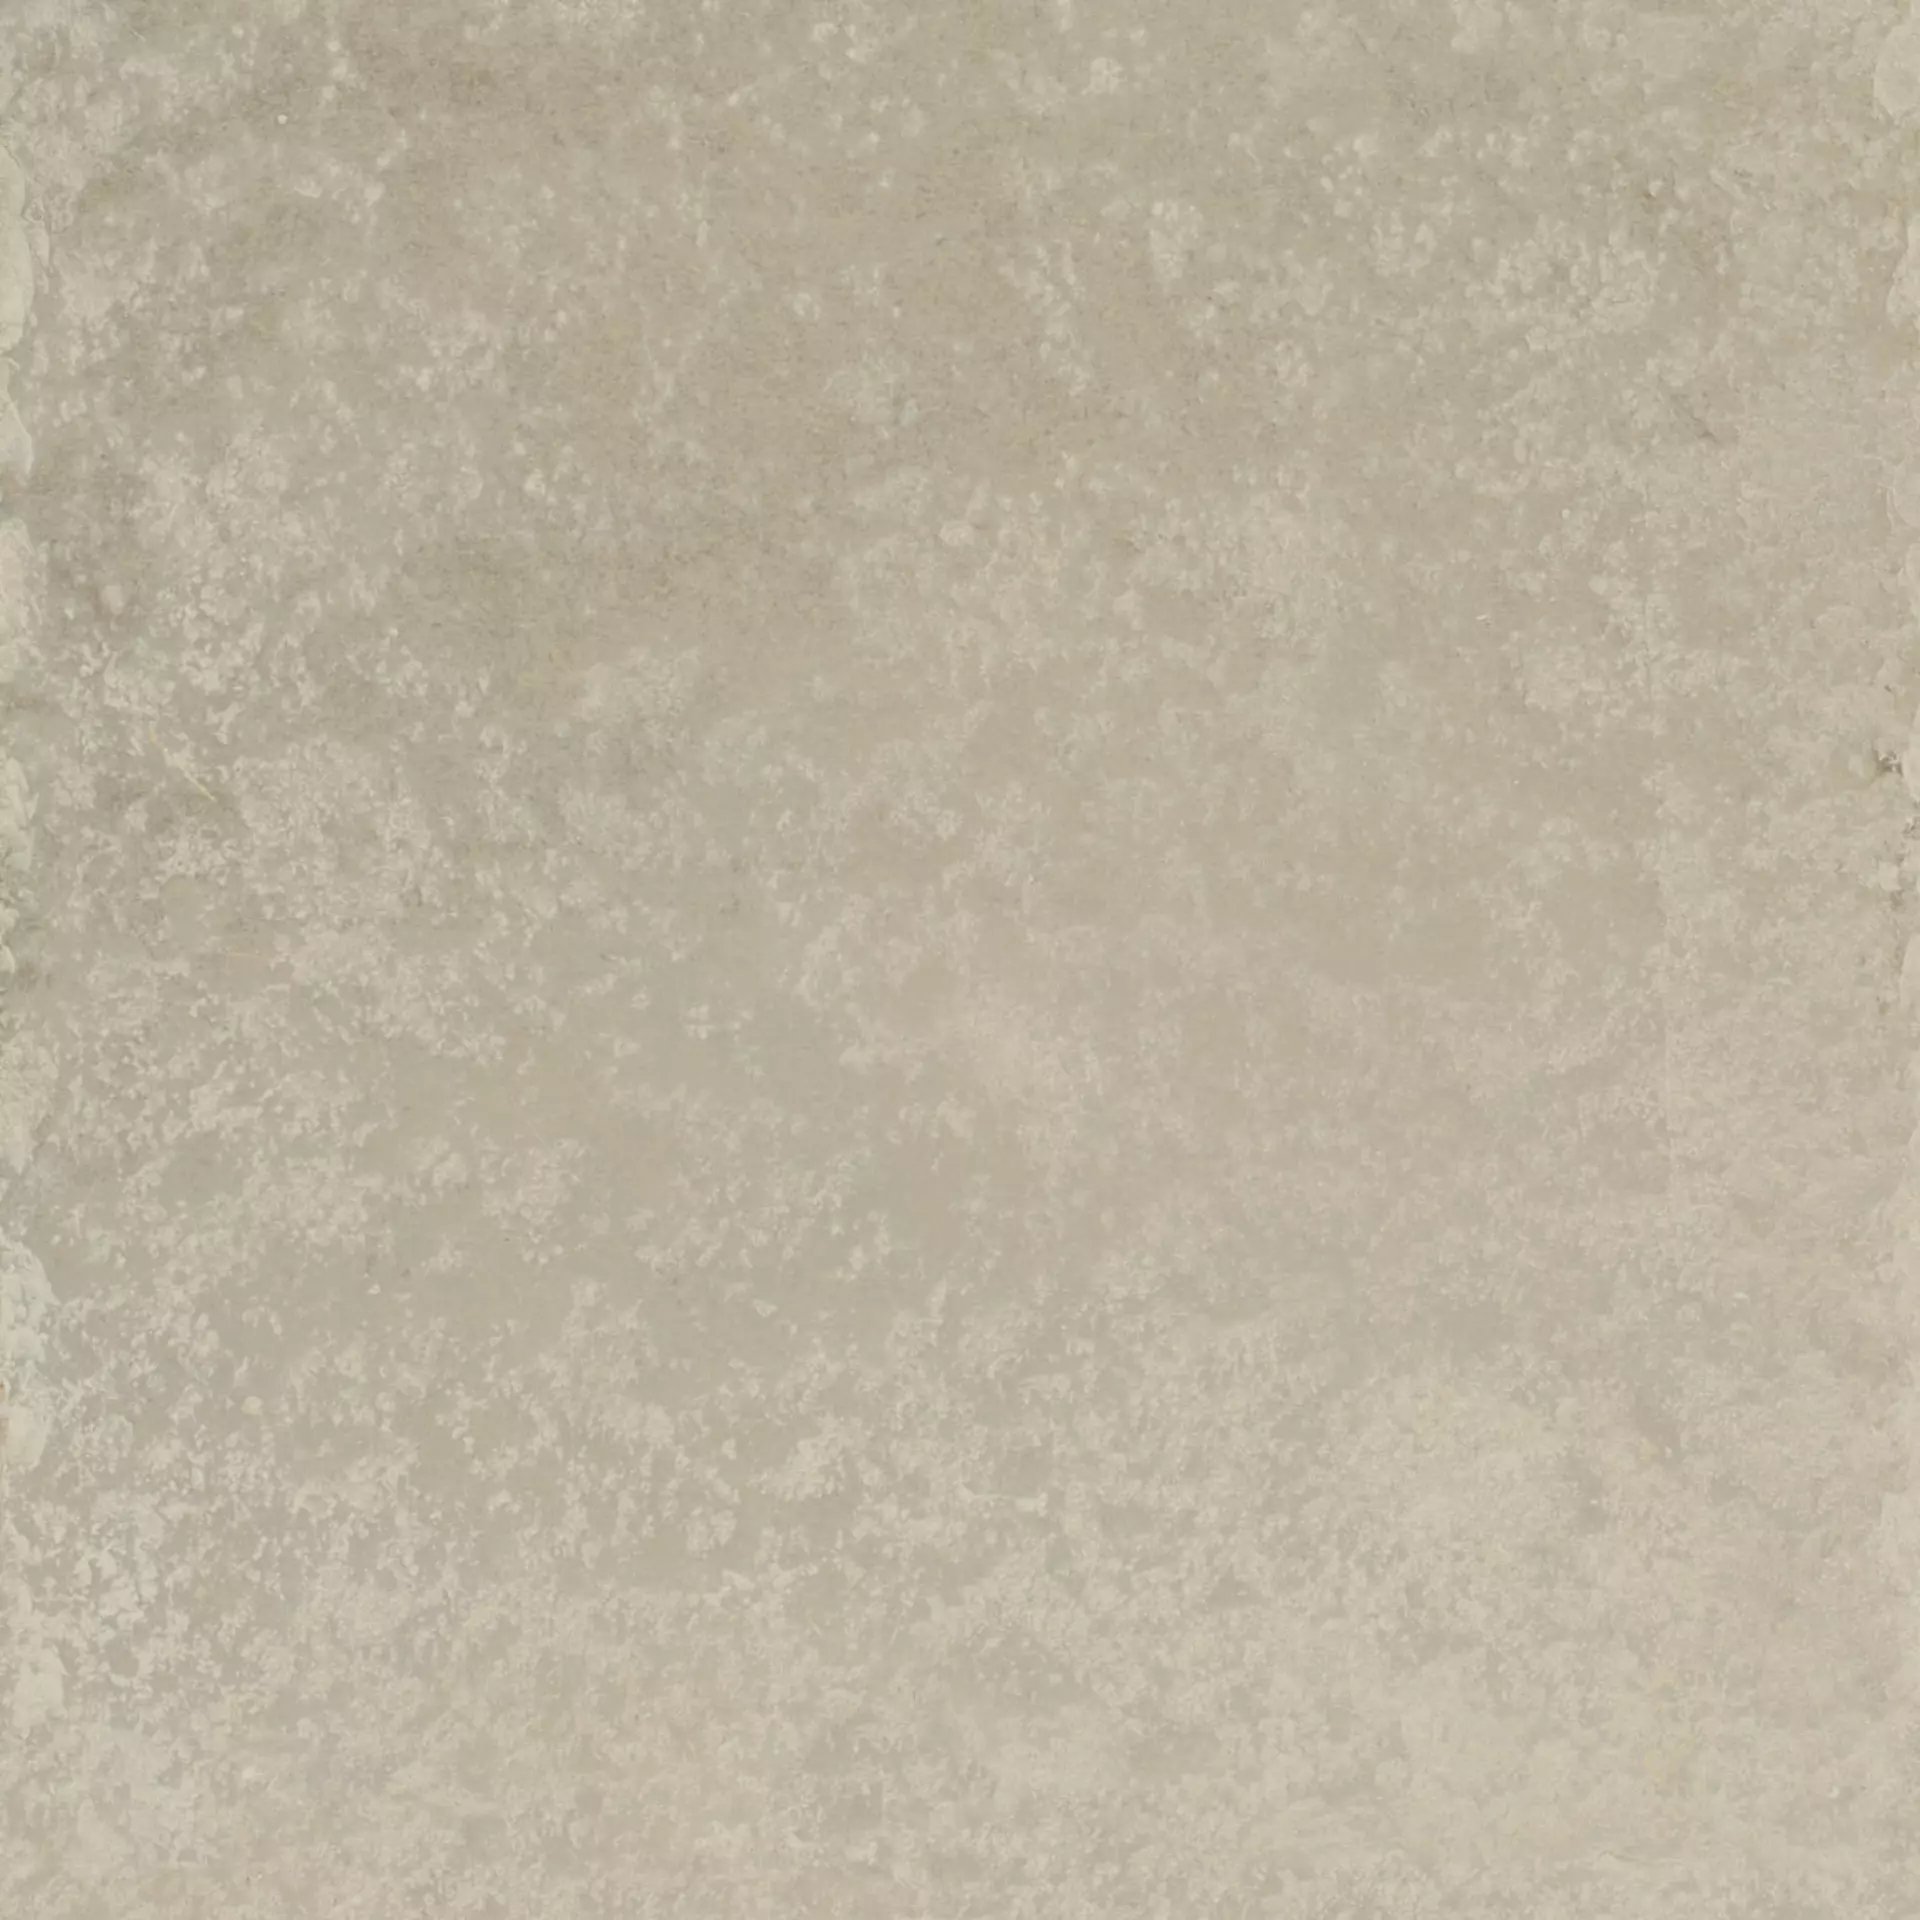 Keope Extreme Beige Strutturato 424E5731 60x60cm rectified 20mm